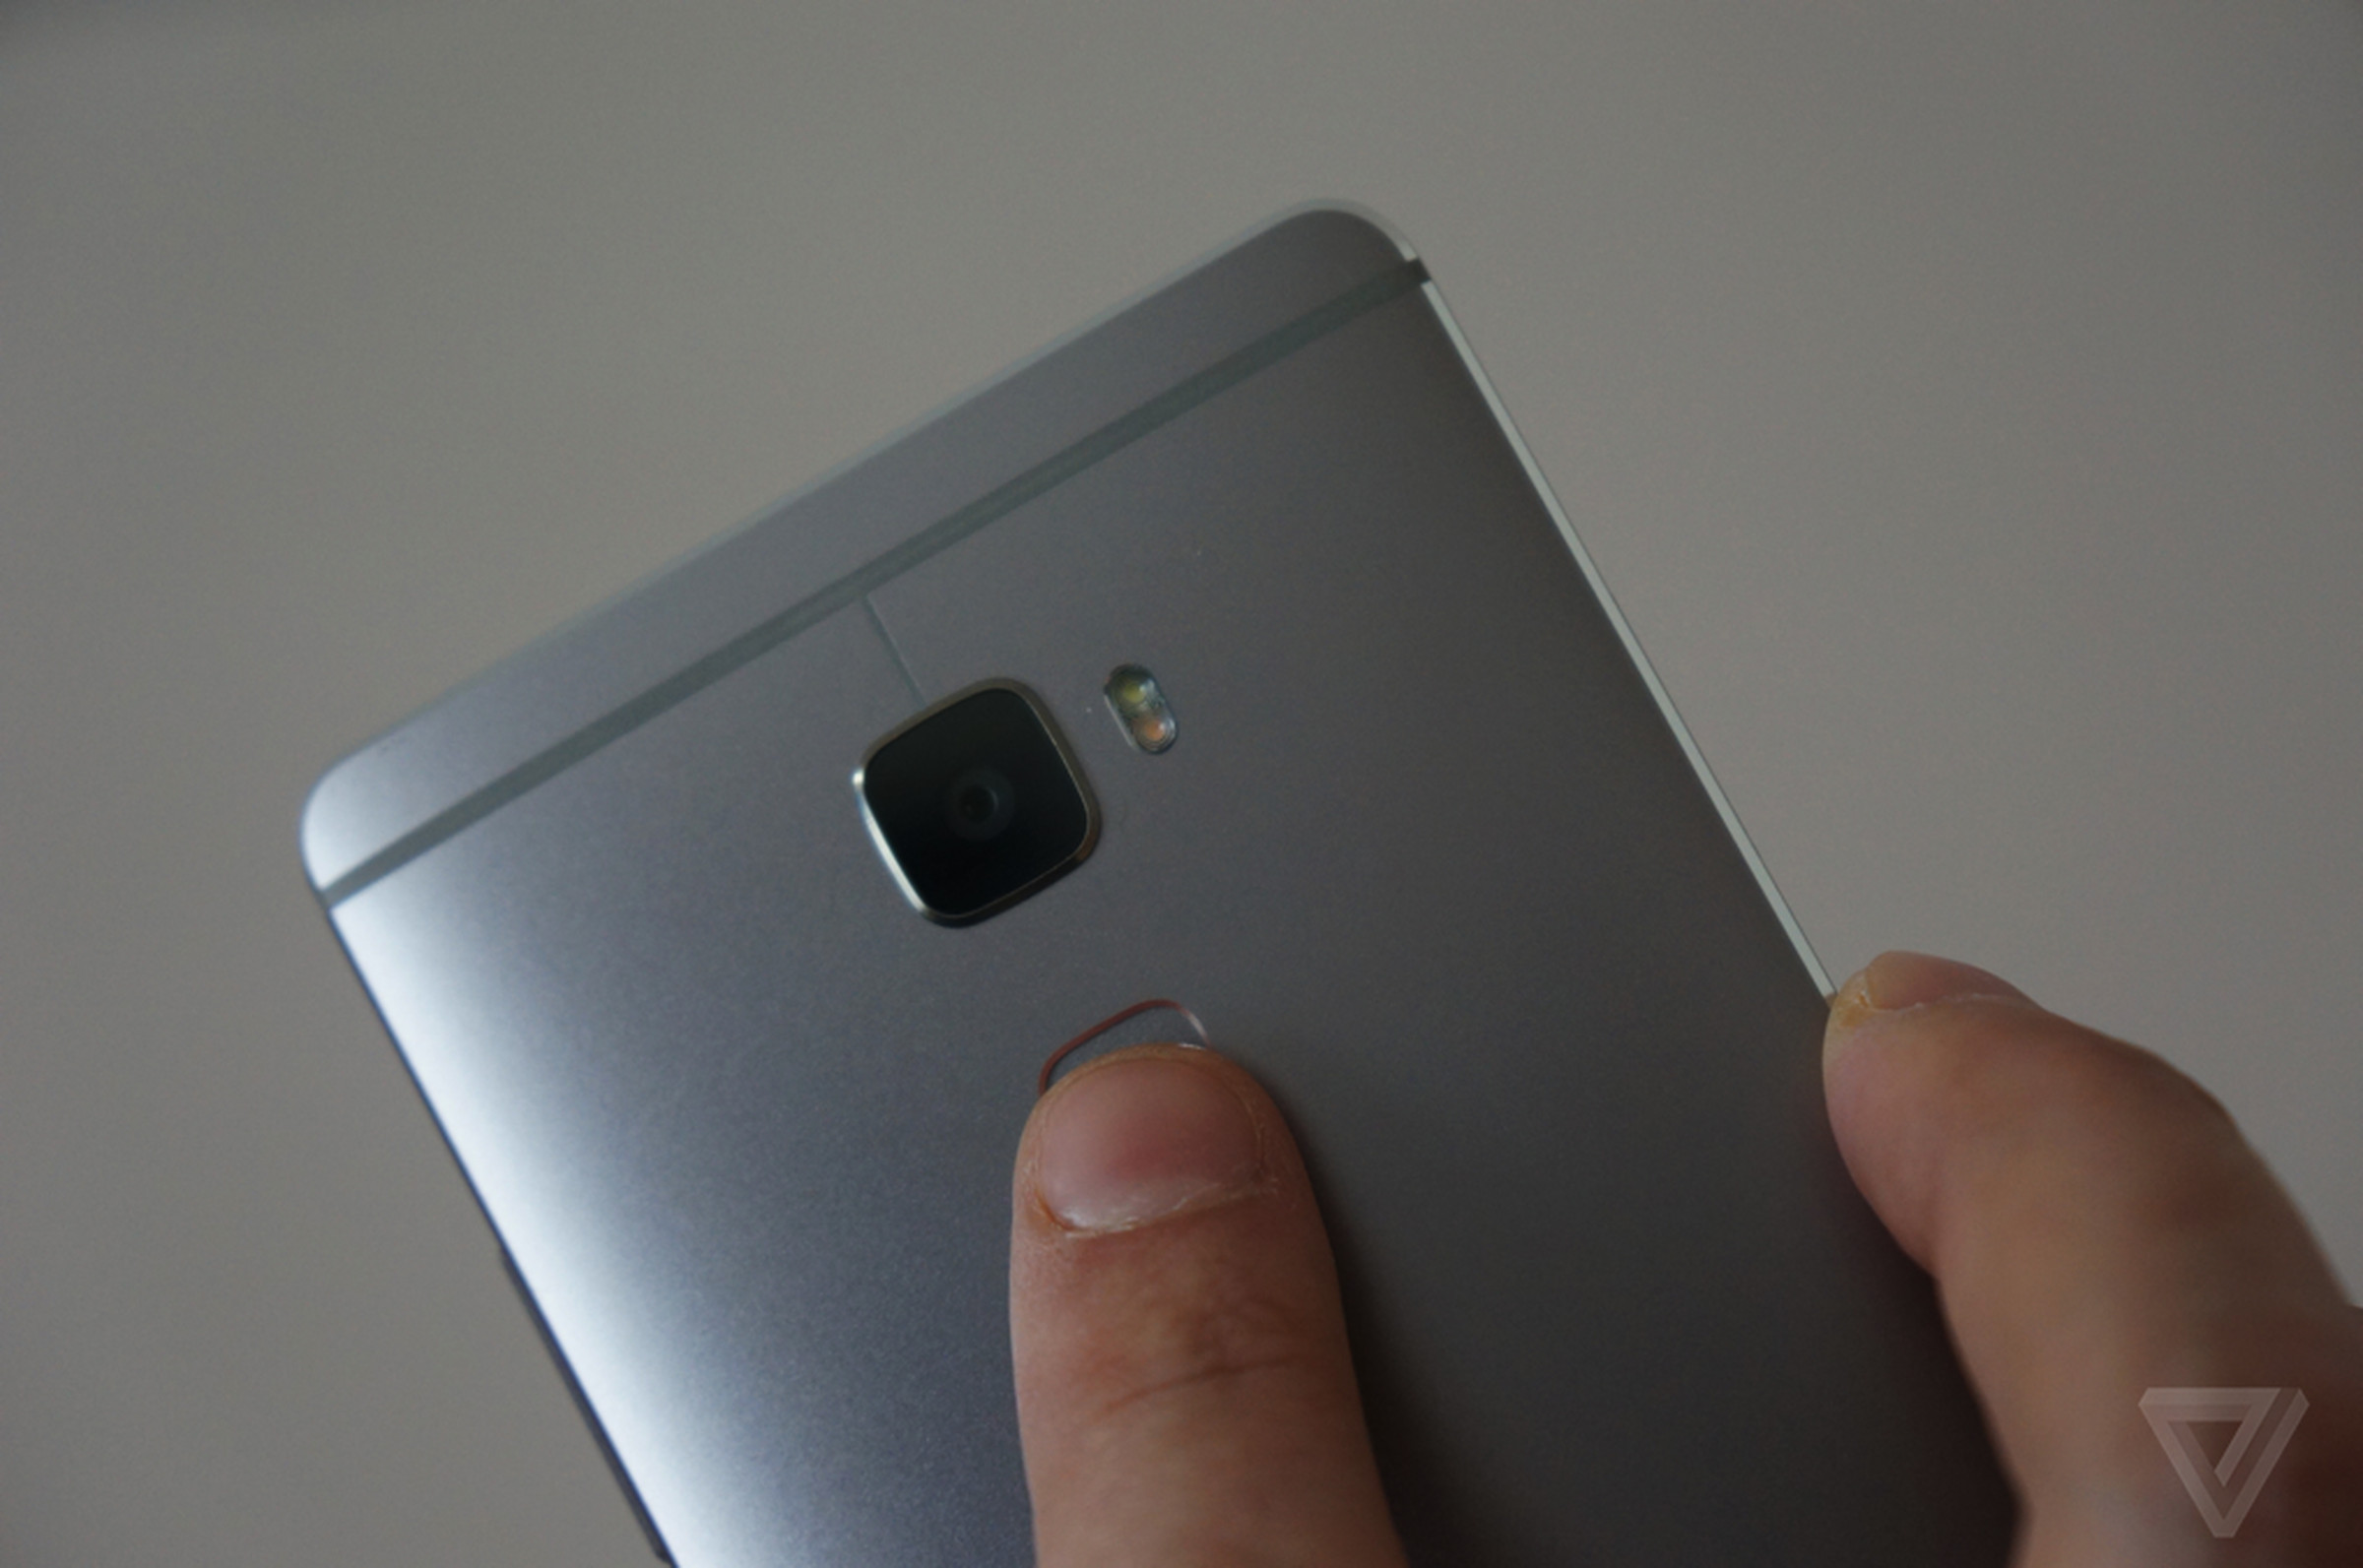 Huawei Mate S hands-on photos